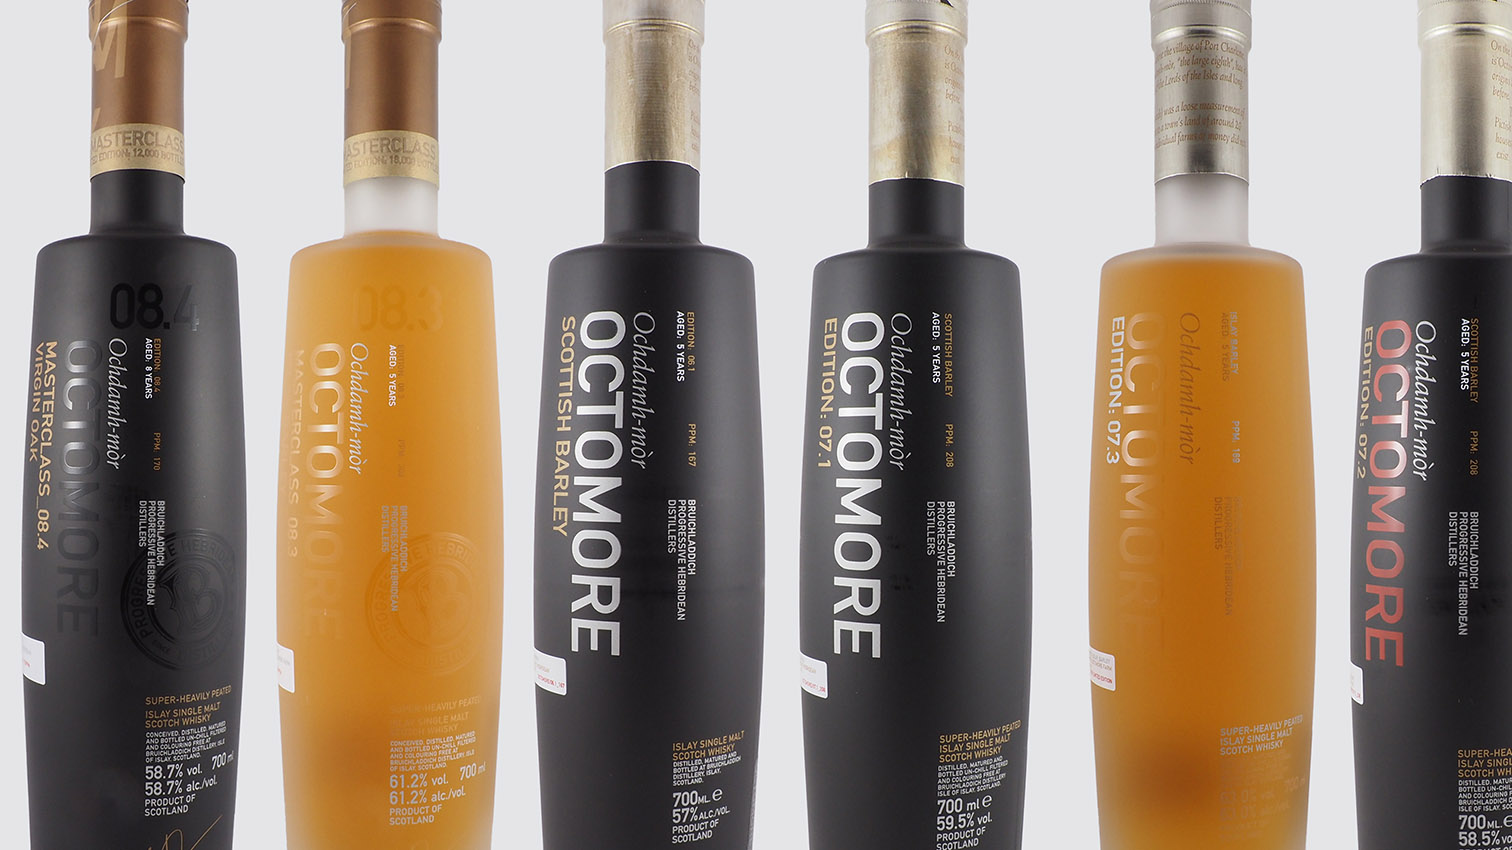 Octomore whisky auction : Auction Performers